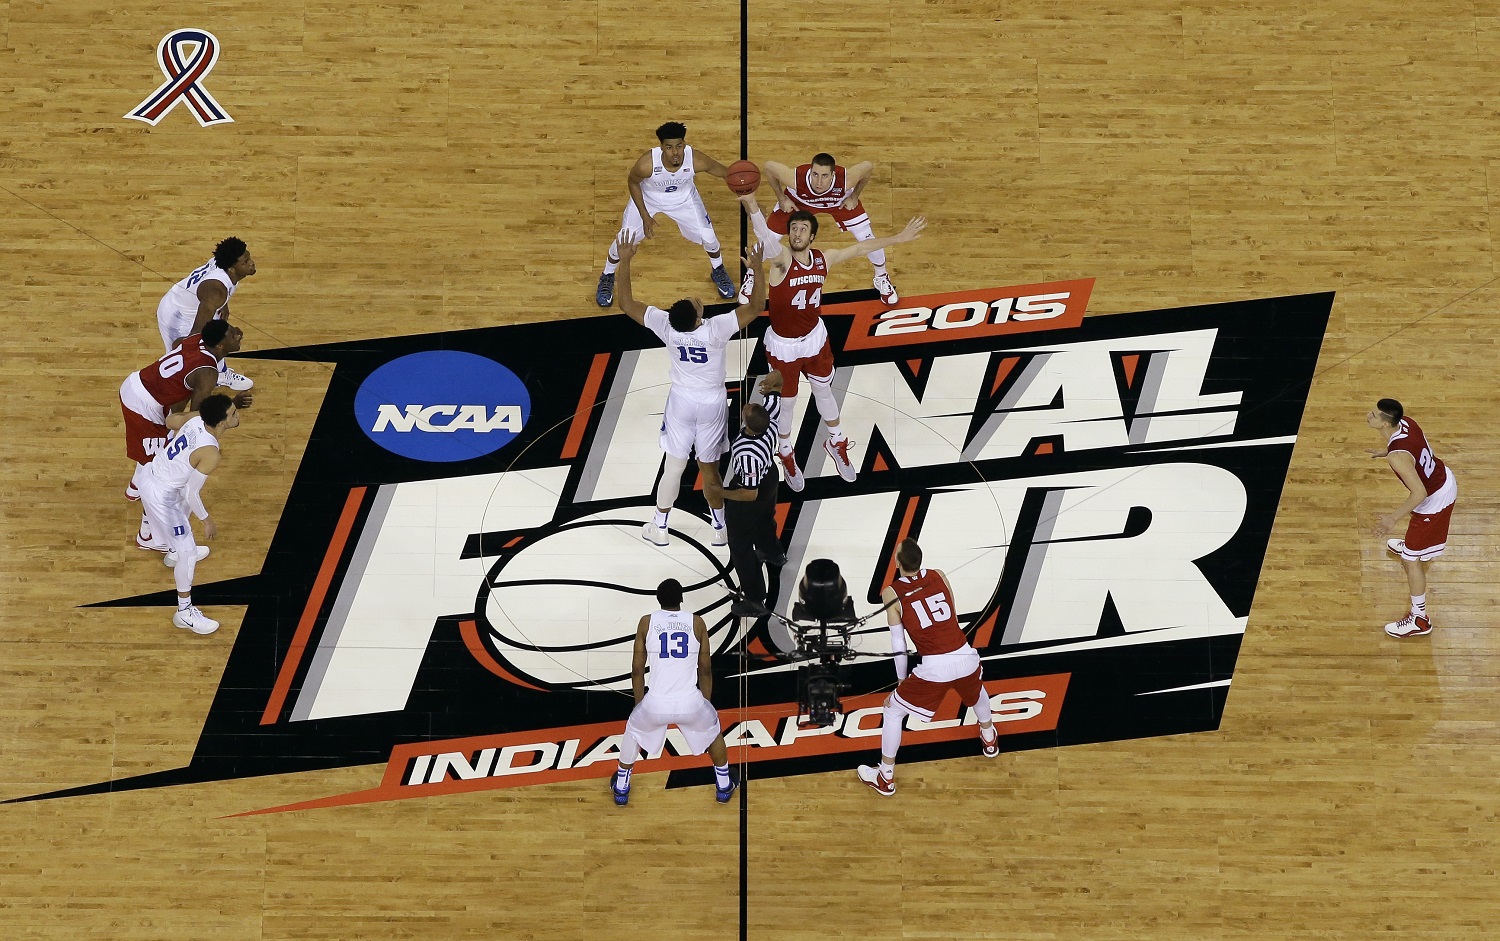 Duke's Jahlil Okafor (15) and Wisconsin's Frank Kaminsky (44) battle for the ball at the tip off during the first half of the NCAA Final Four college basketball tournament championship game Monday, April 6, 2015, in Indianapolis. (AP Photo/David J. Phillip)